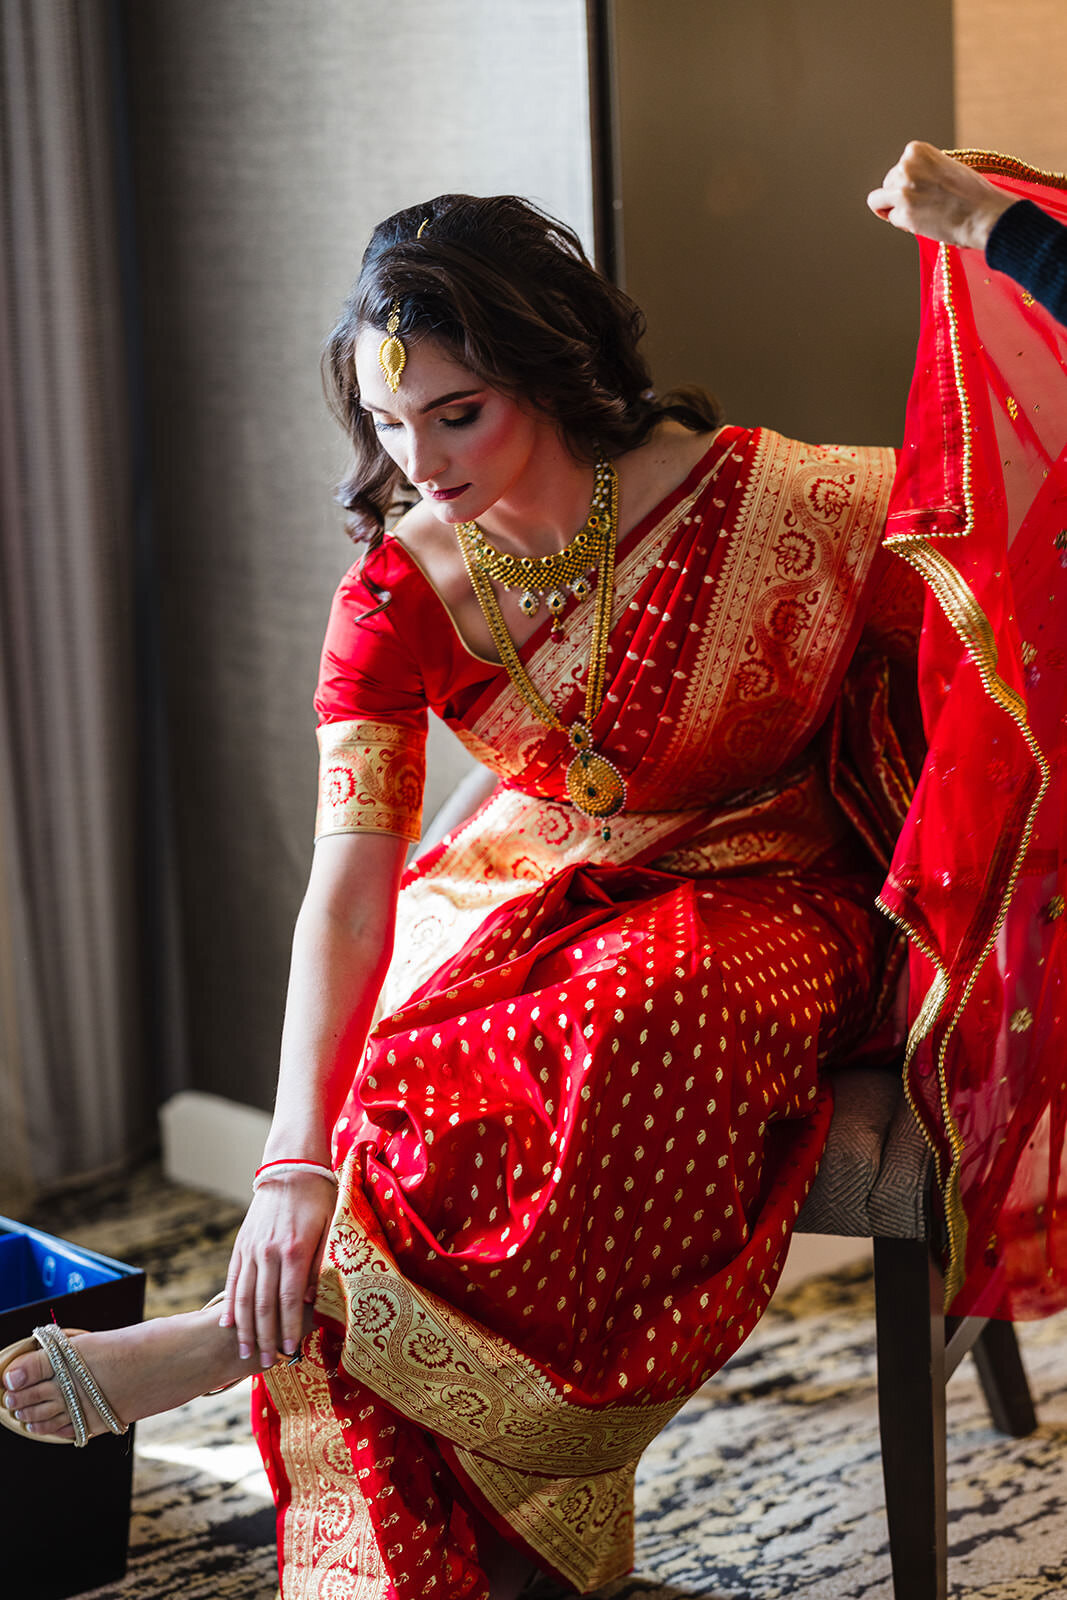 A woman dressed in a red and gold Indian saree sitting pensively with her bridal jewelry